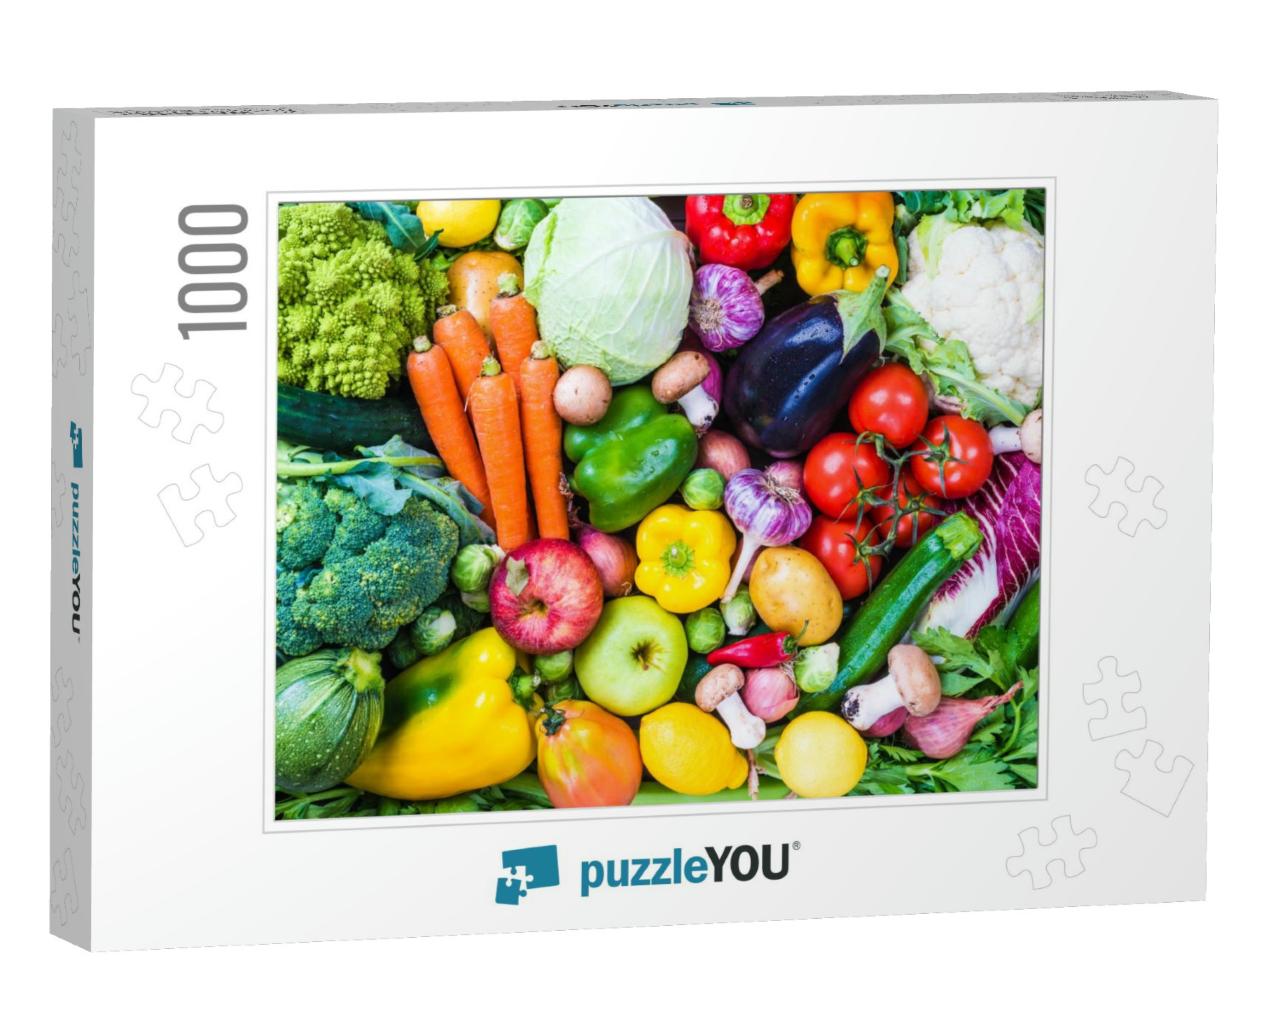 Raw Vegetables & Fruits Background. Healthy Organic Food... Jigsaw Puzzle with 1000 pieces